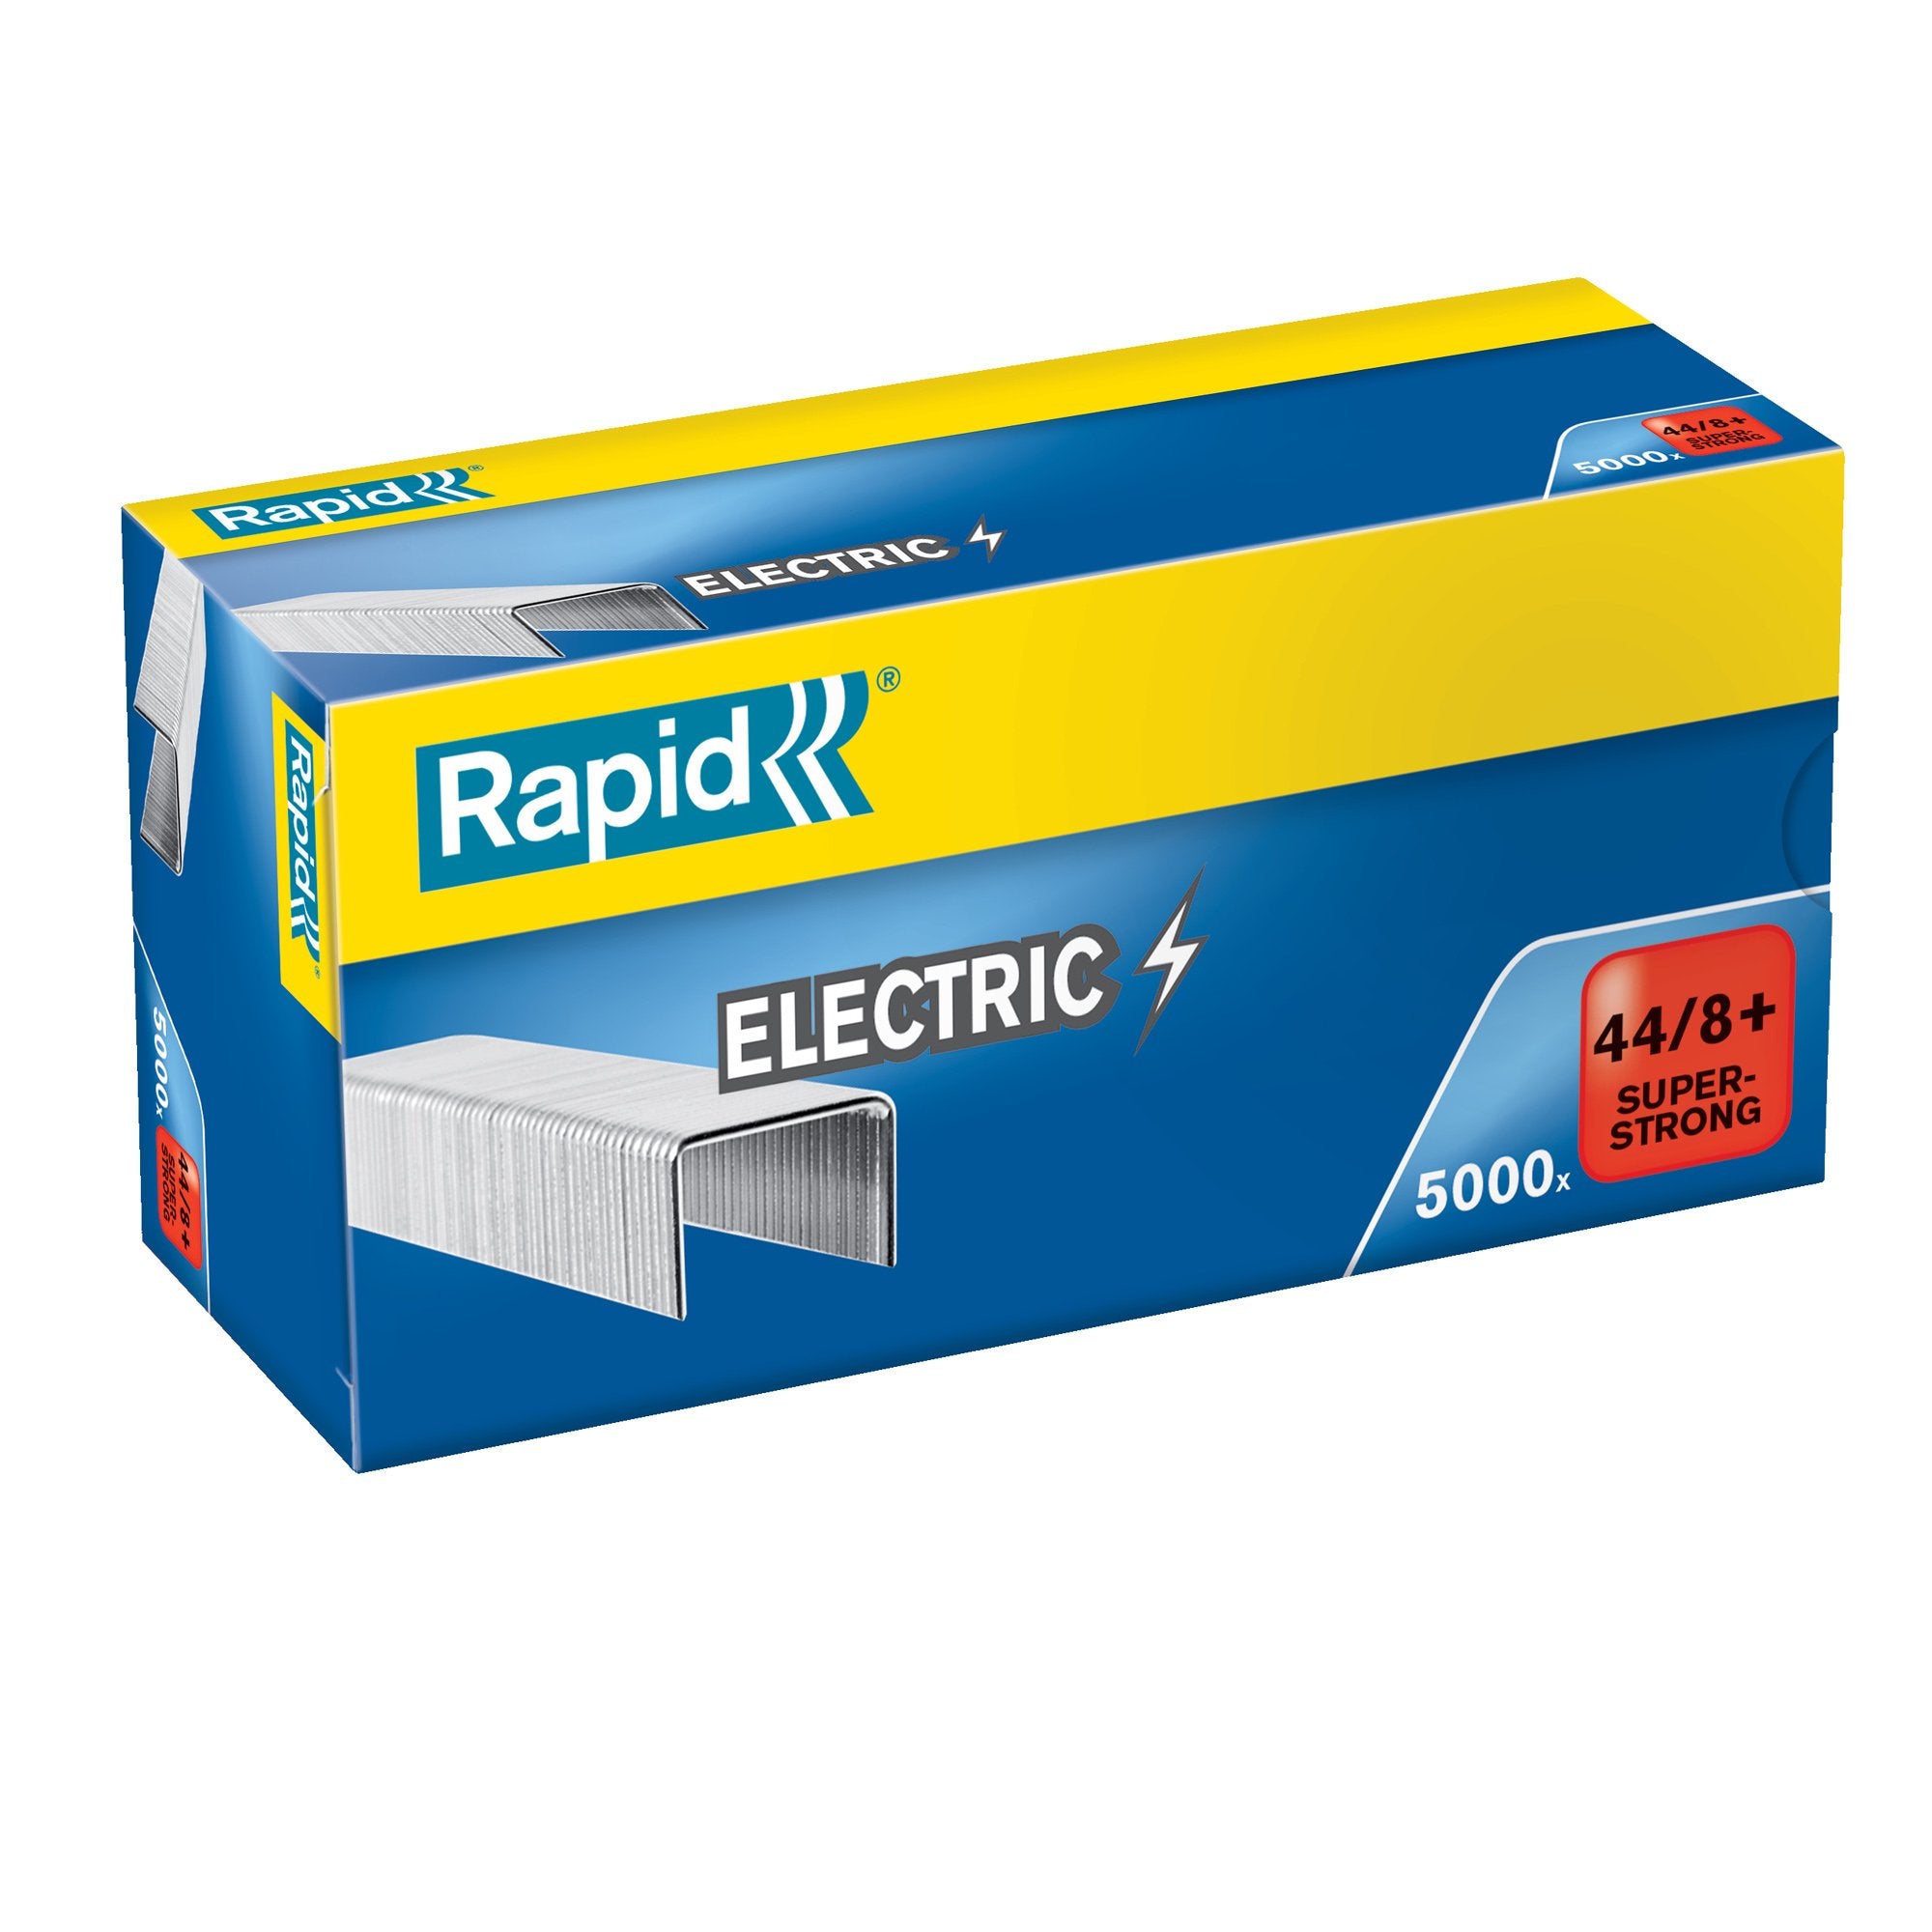 rapid-scatola-5000-punti-special-electric-44-8